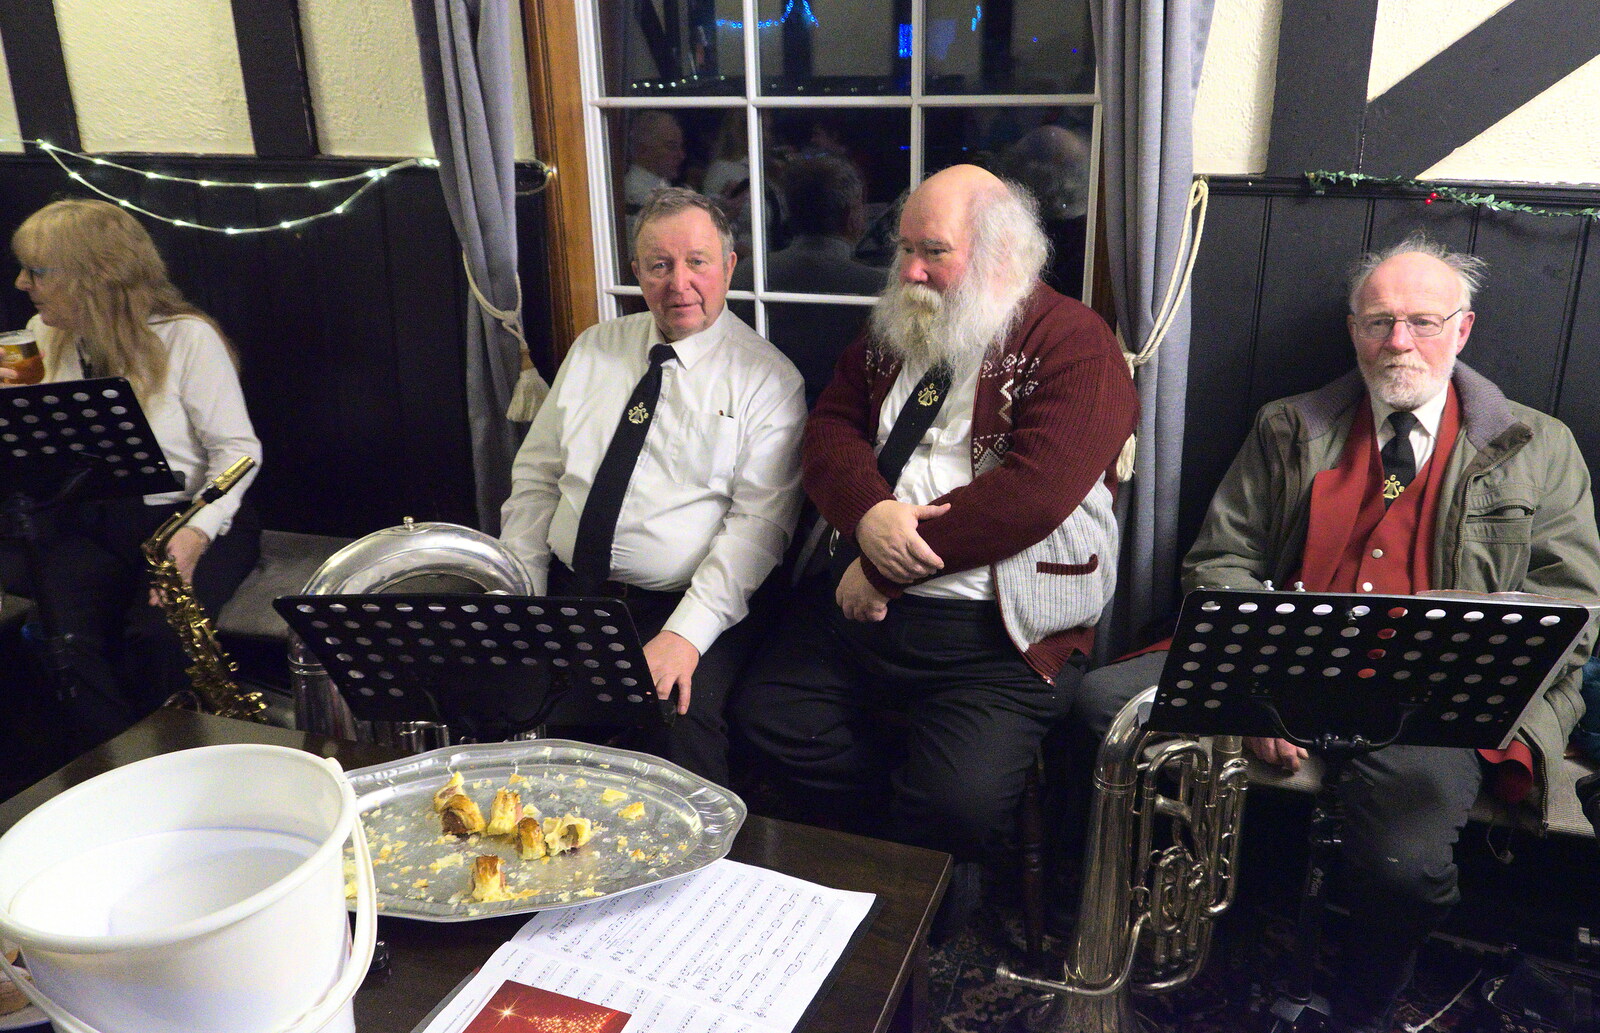 Julian, Adrian and Kenny in a row from The Gislingham Silver Band at Thornham and Yaxley, Suffolk - 19th December 2022